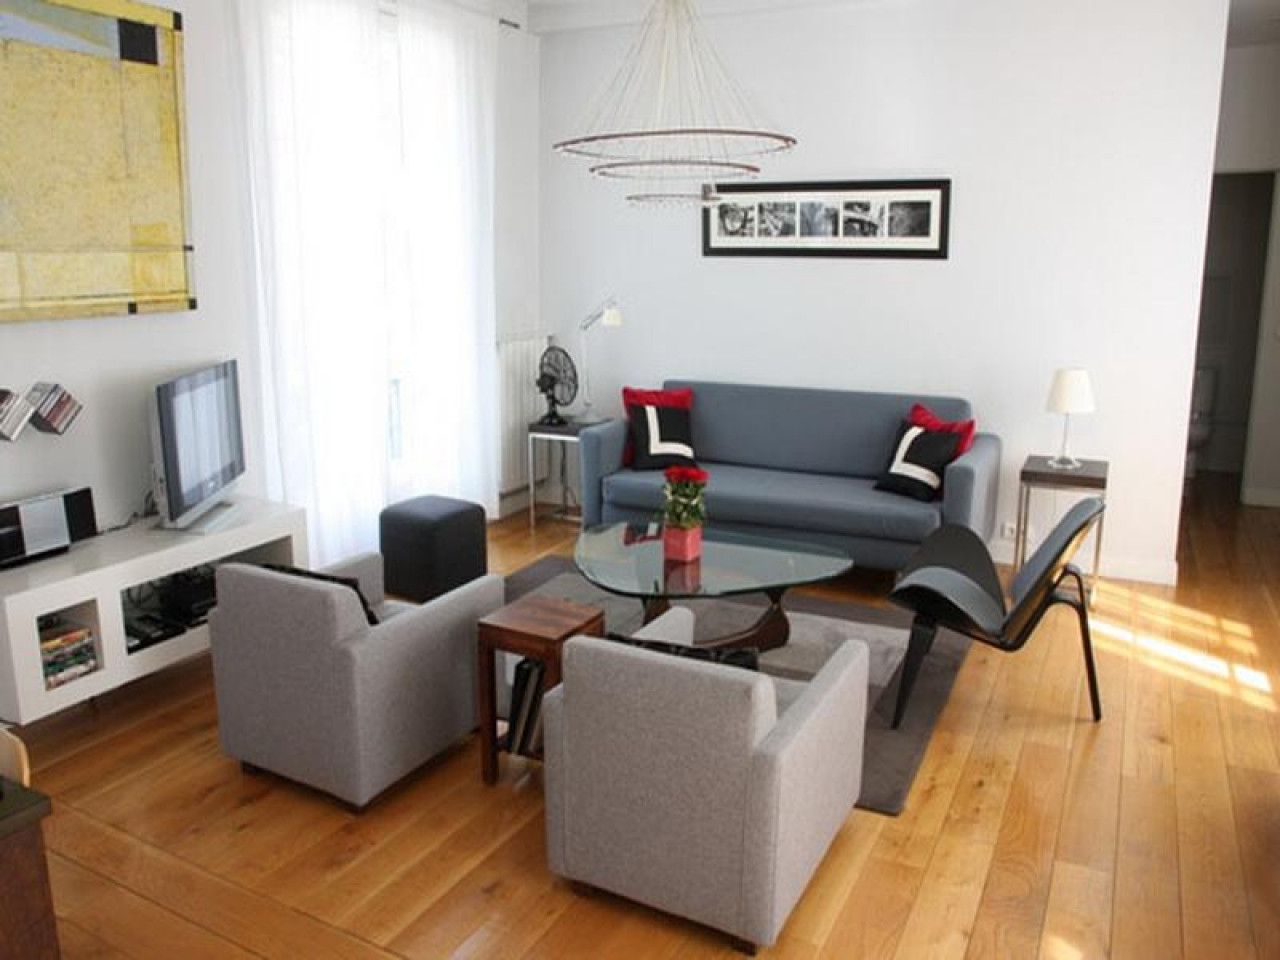 Small Living Room Sets
 Small living room furniture sets small living room table